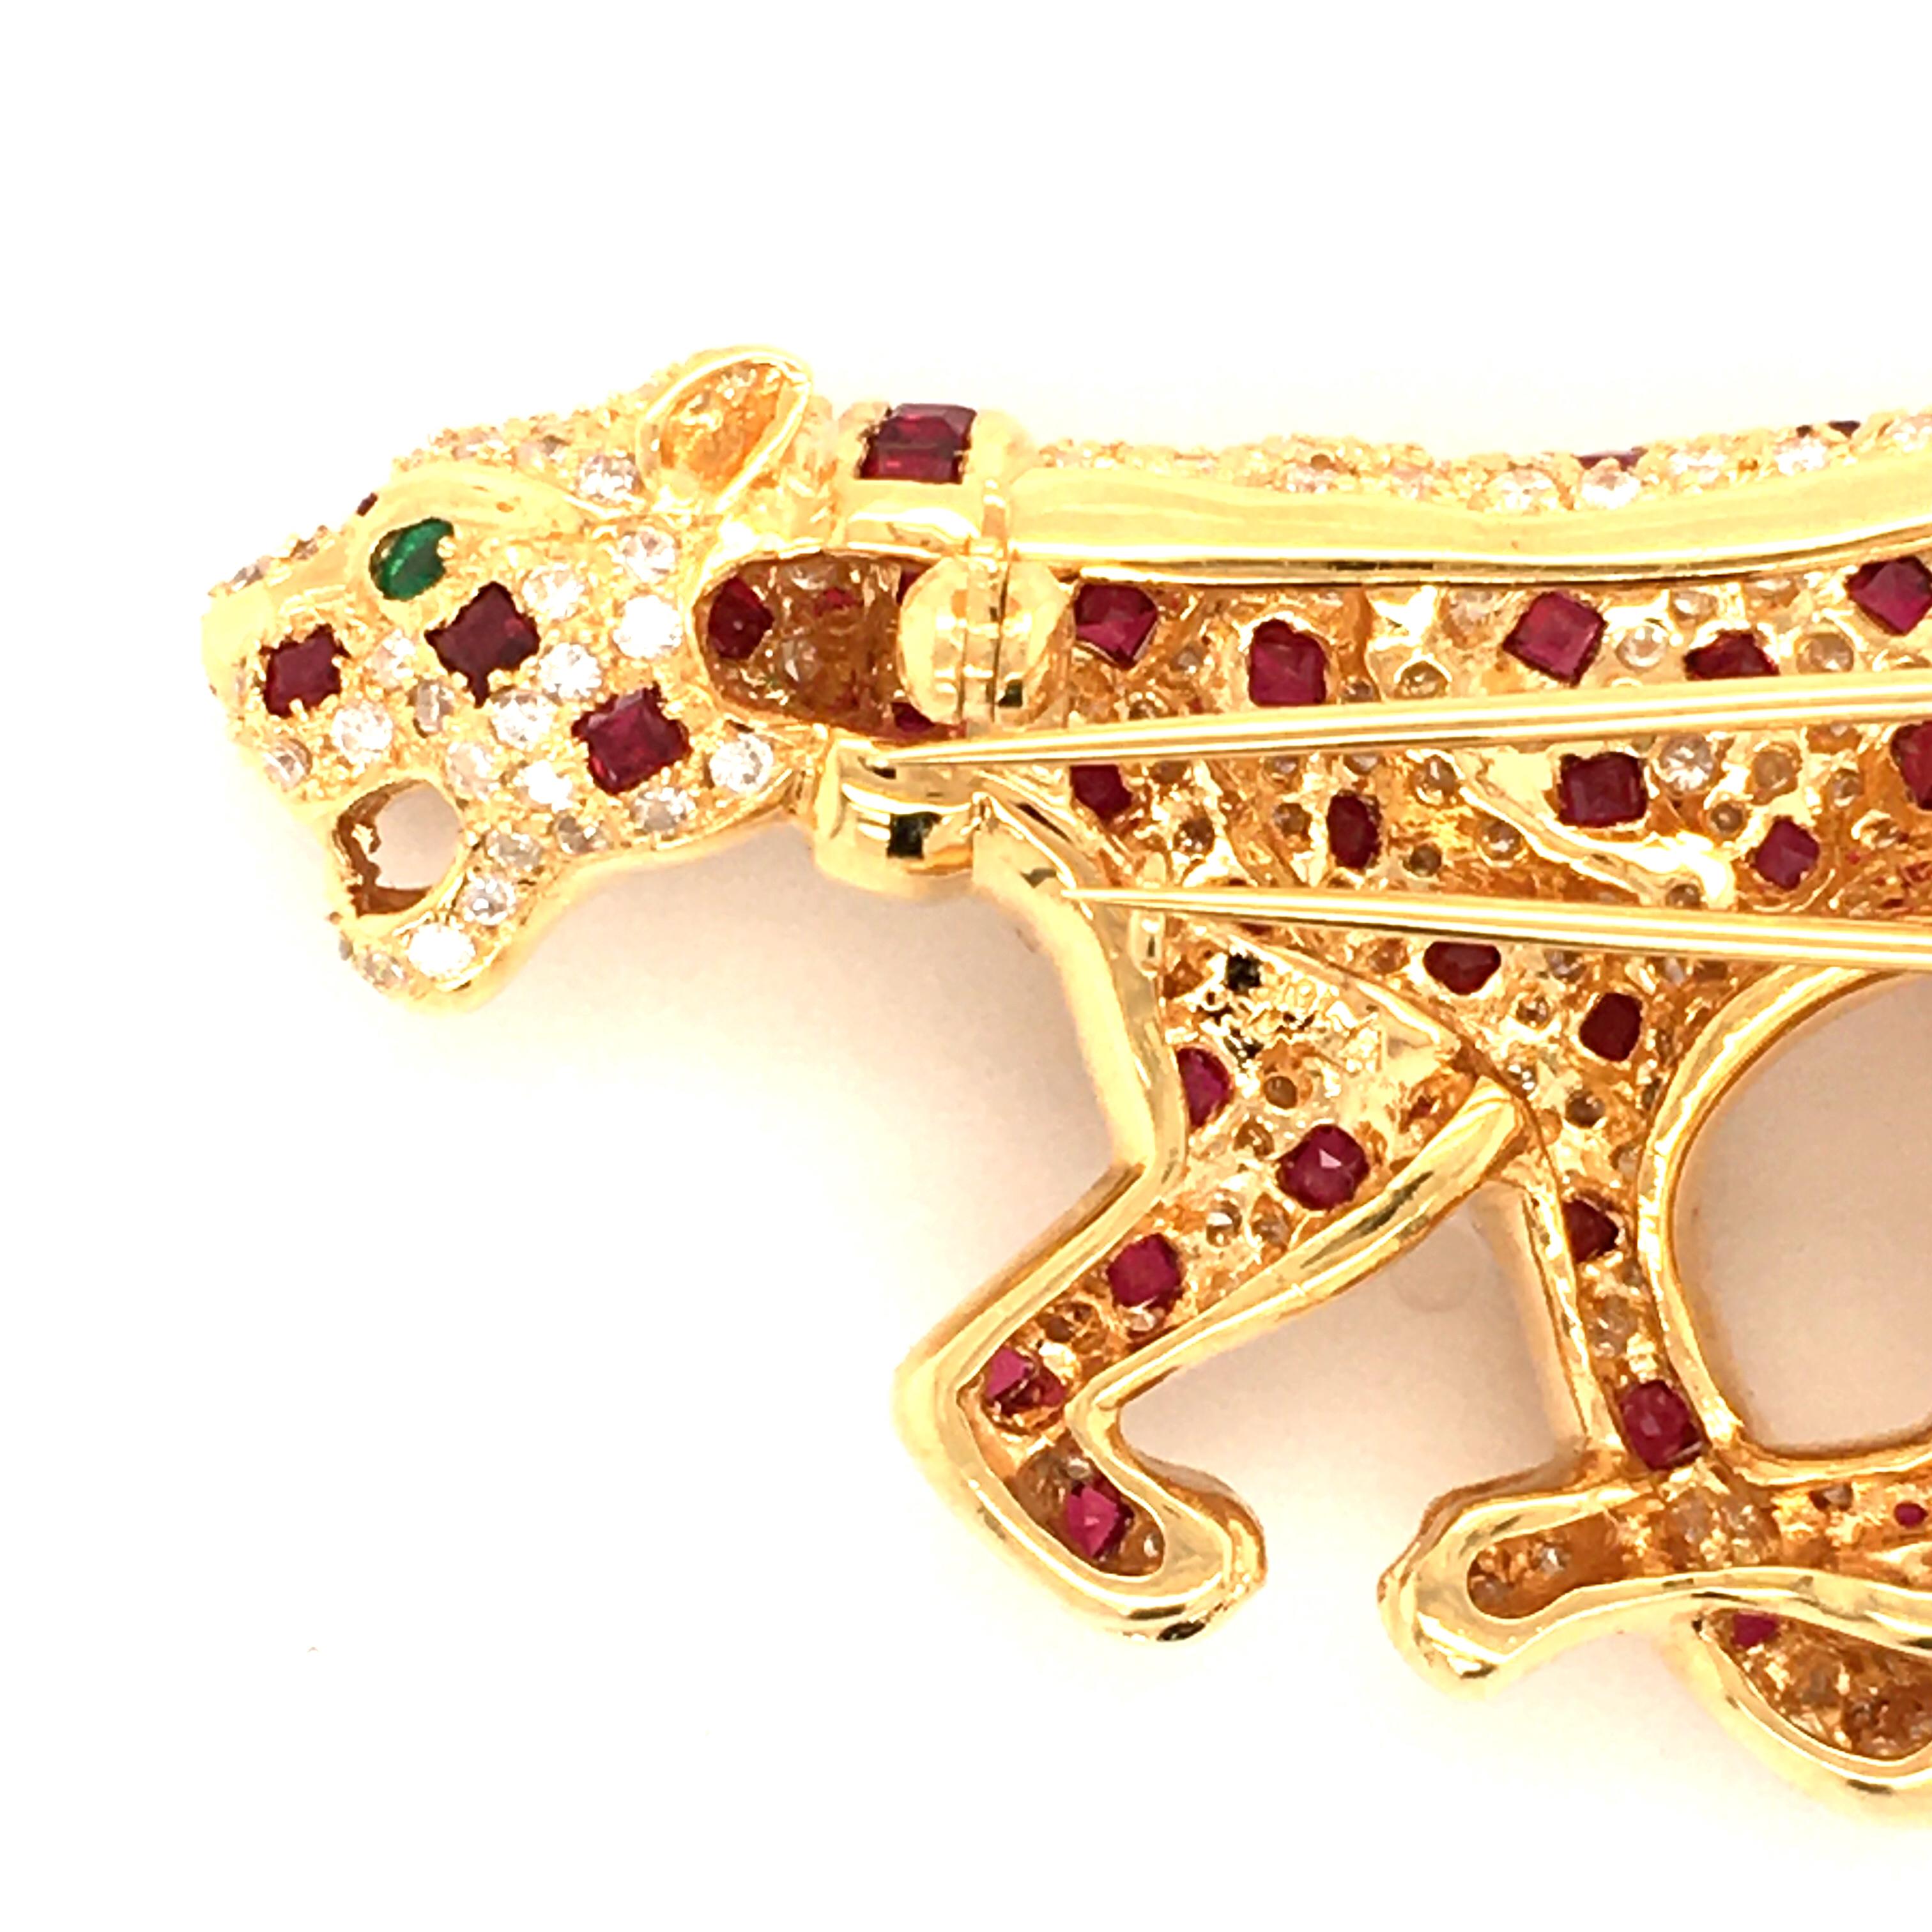 Unique Panther Brooch with Rubies and Diamonds in 18 Karat Yellow Gold 4